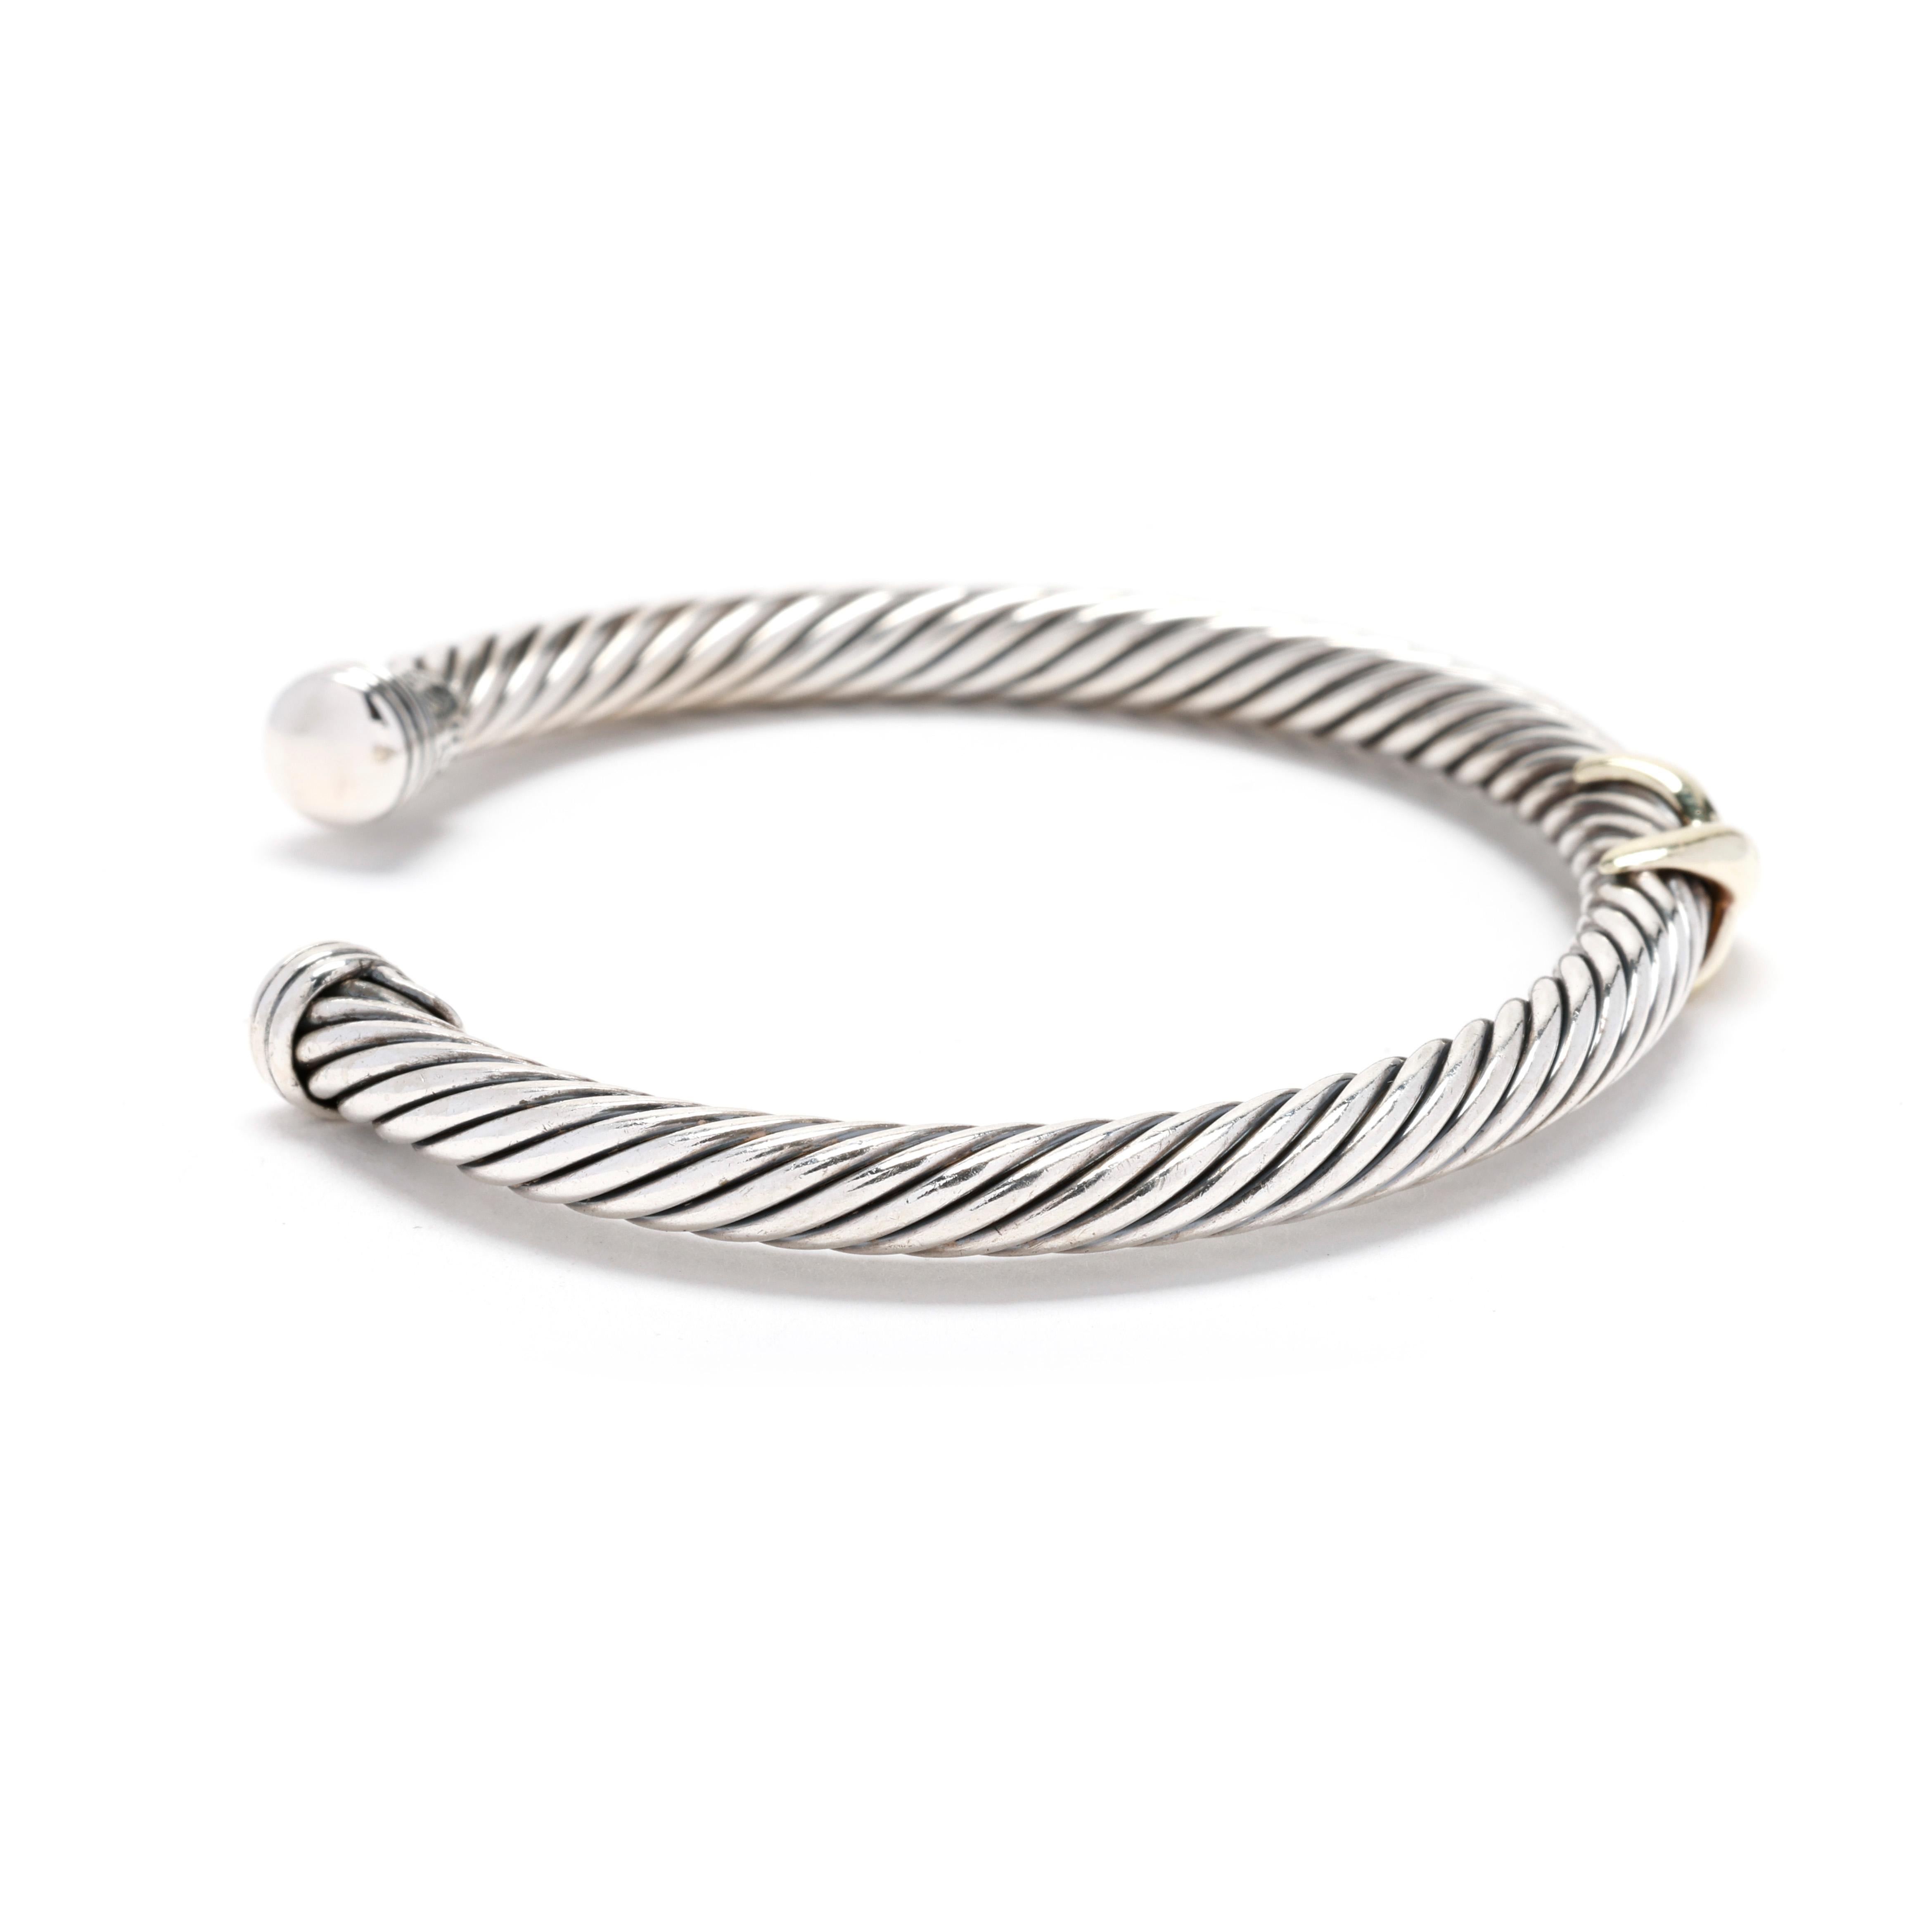 A David Yurman sterling silver 14 karat yellow gold and sterling silver X cable cuff bracelet. This cuff bracelet features a silver cable motif cuff with a gold X accent. Stackable with other cuffs!



Length: 6.25 in.; adjustable



DY Size